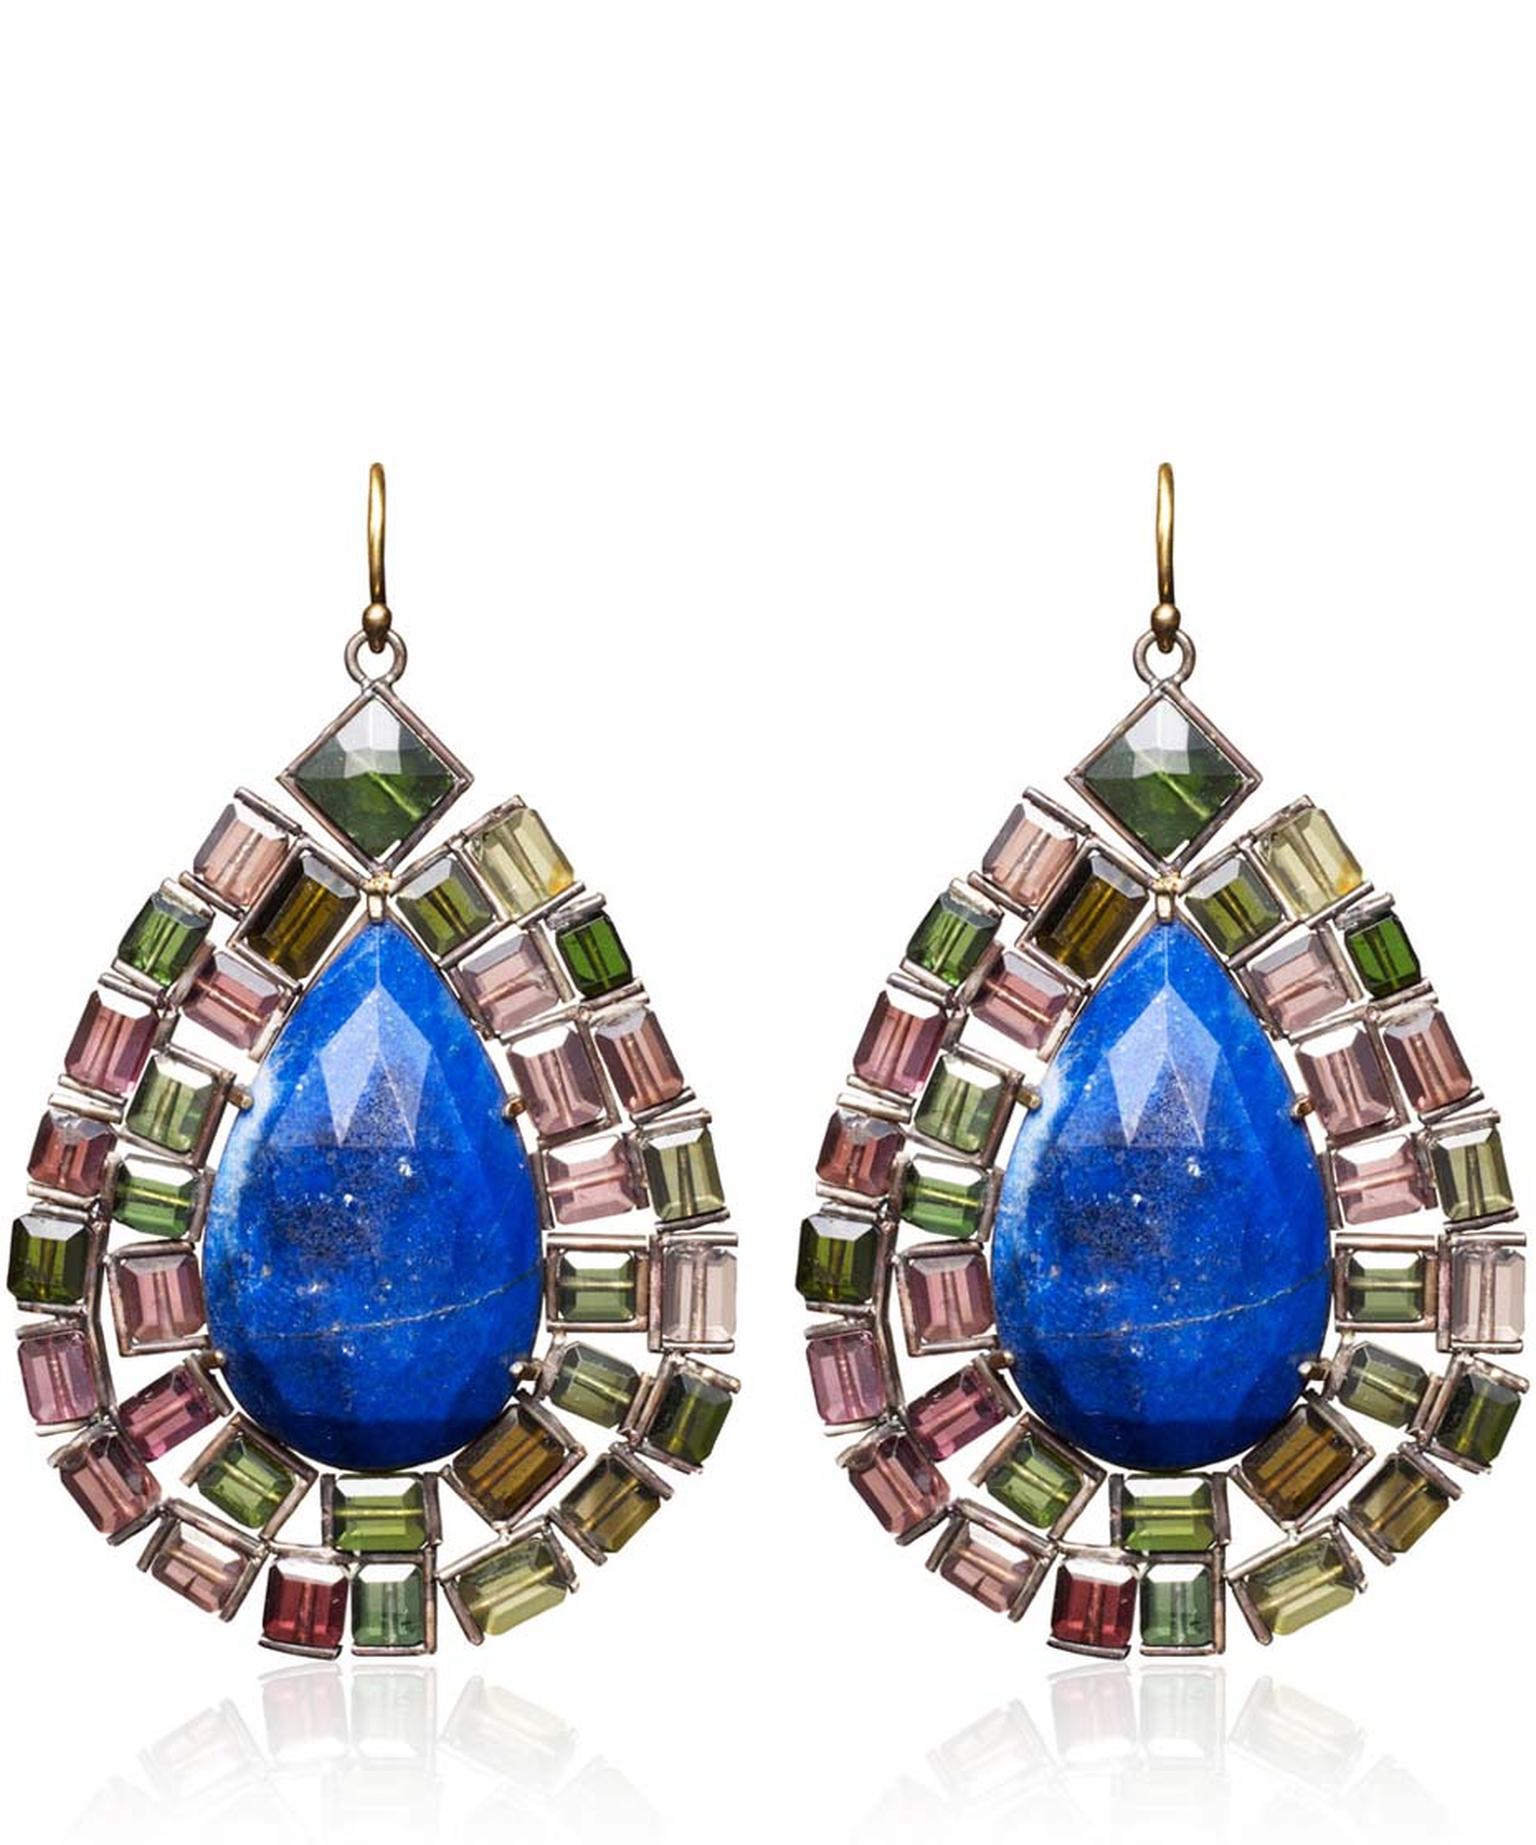 Nak Armstrong drop earrings set with green and pink tourmaline and lapis lazuli (£2,565).